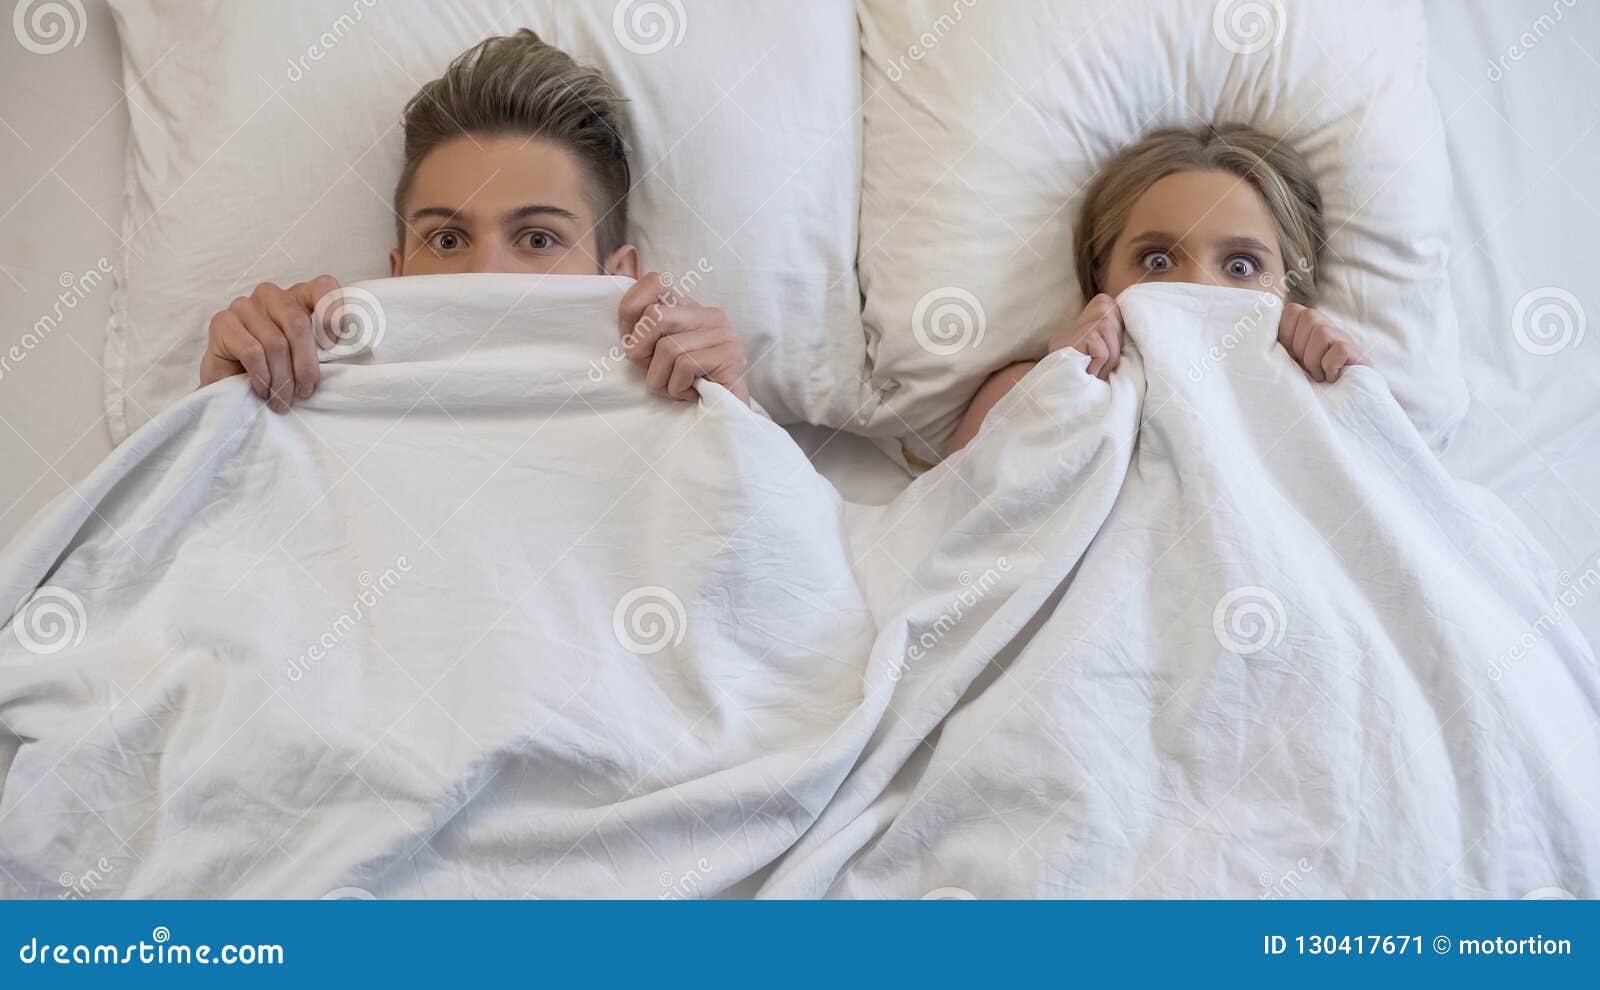 lovers caught in bed by parents, embarrassed and frightened, looking shocked